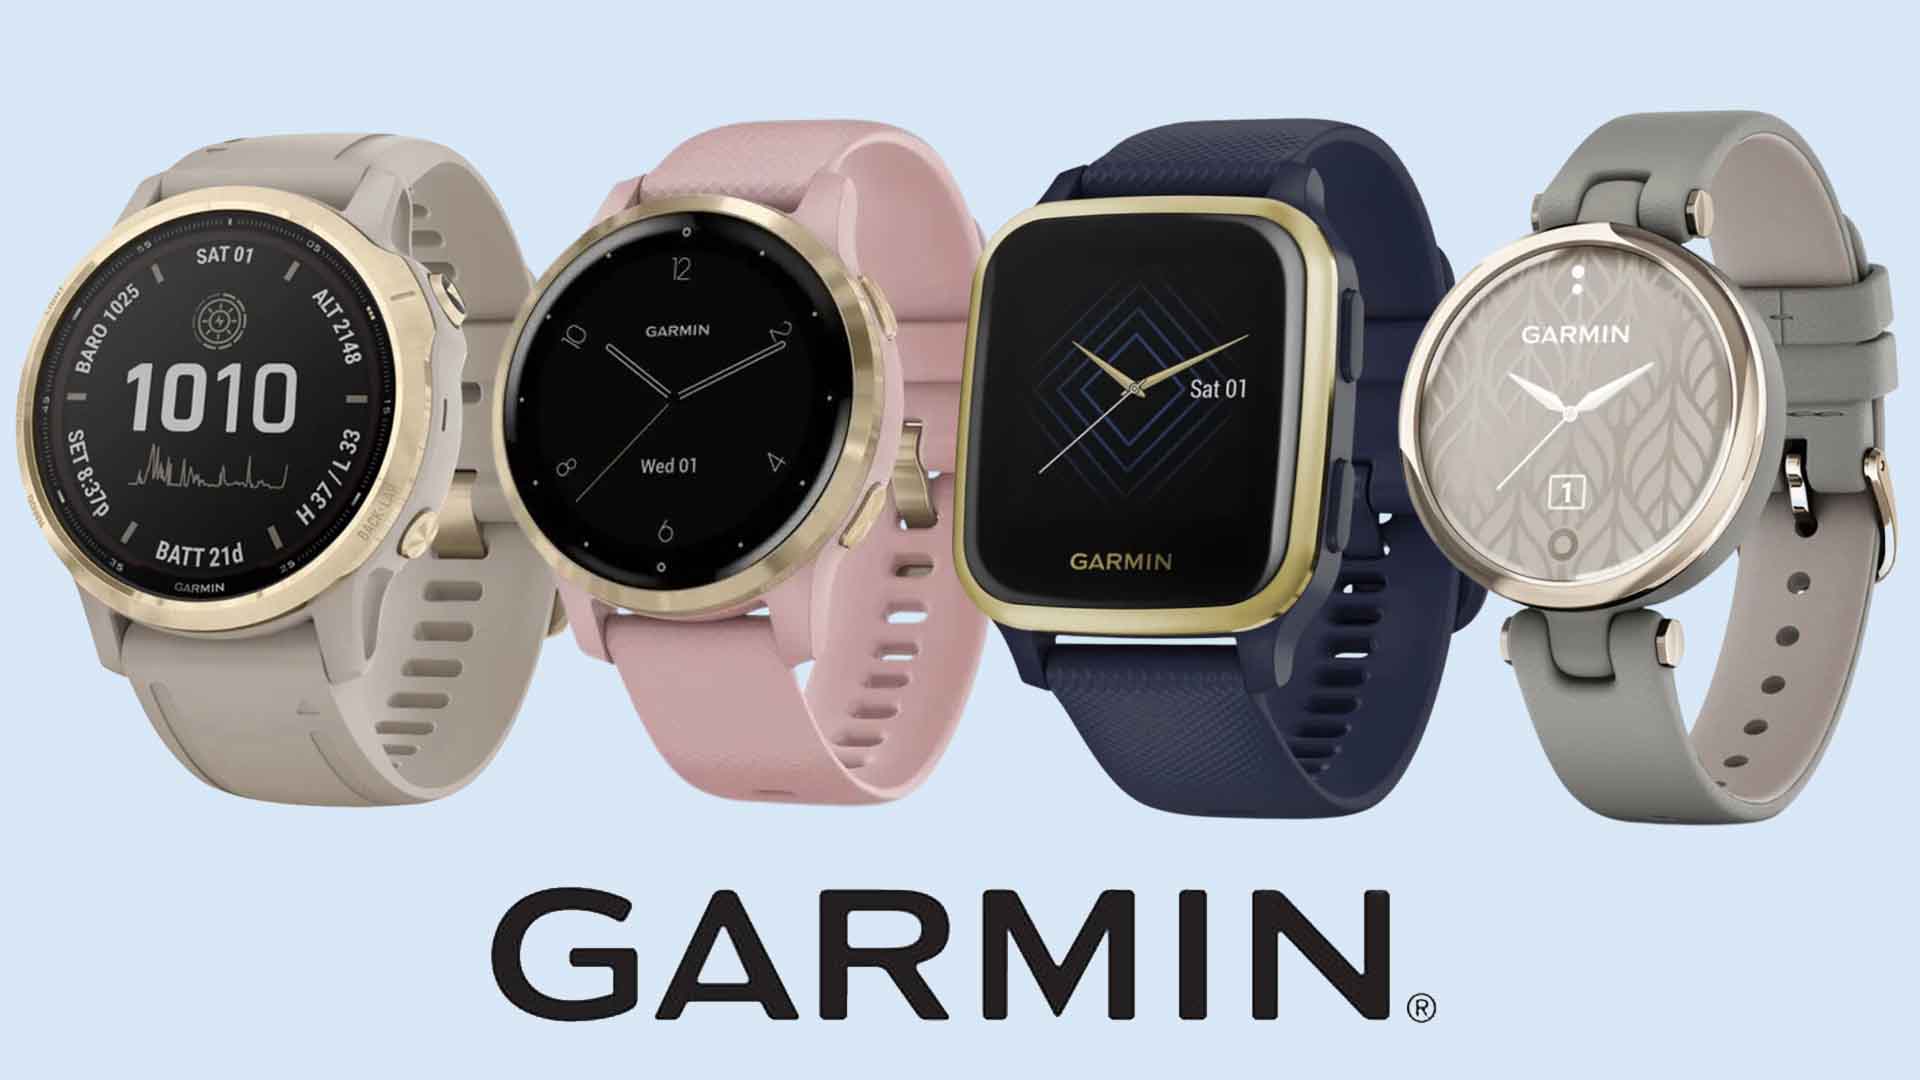 Garmin is mother-loving amazing watch sale right now